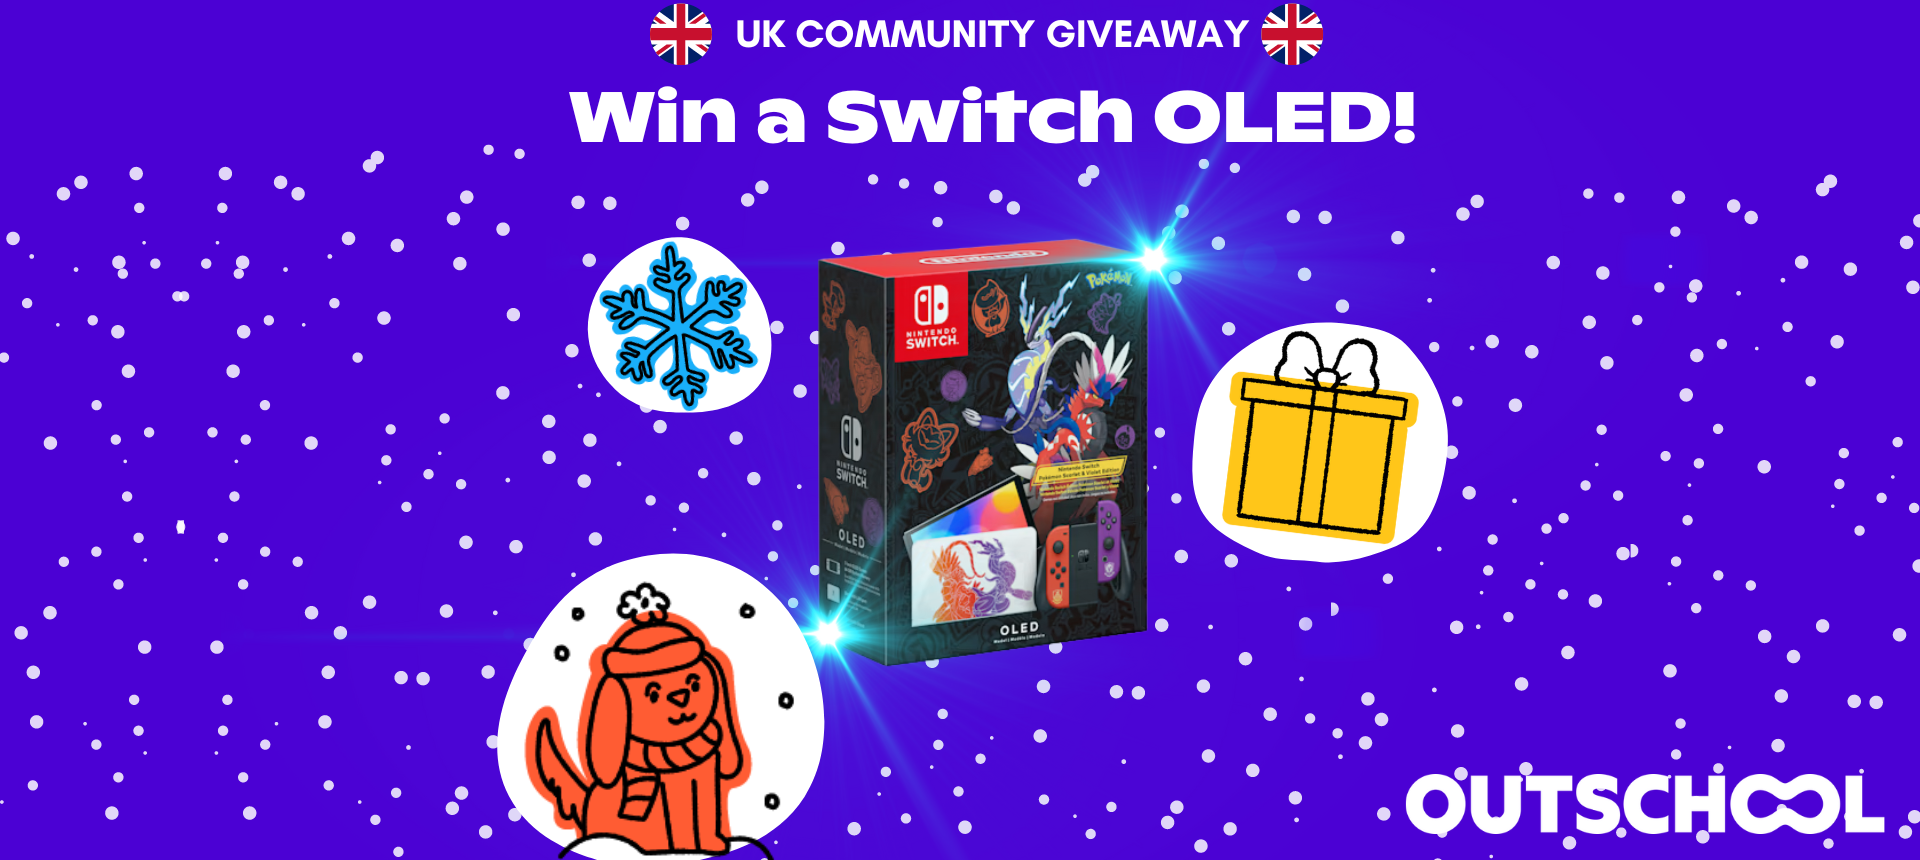 UK Community Giveaway: Win a Switch OLED